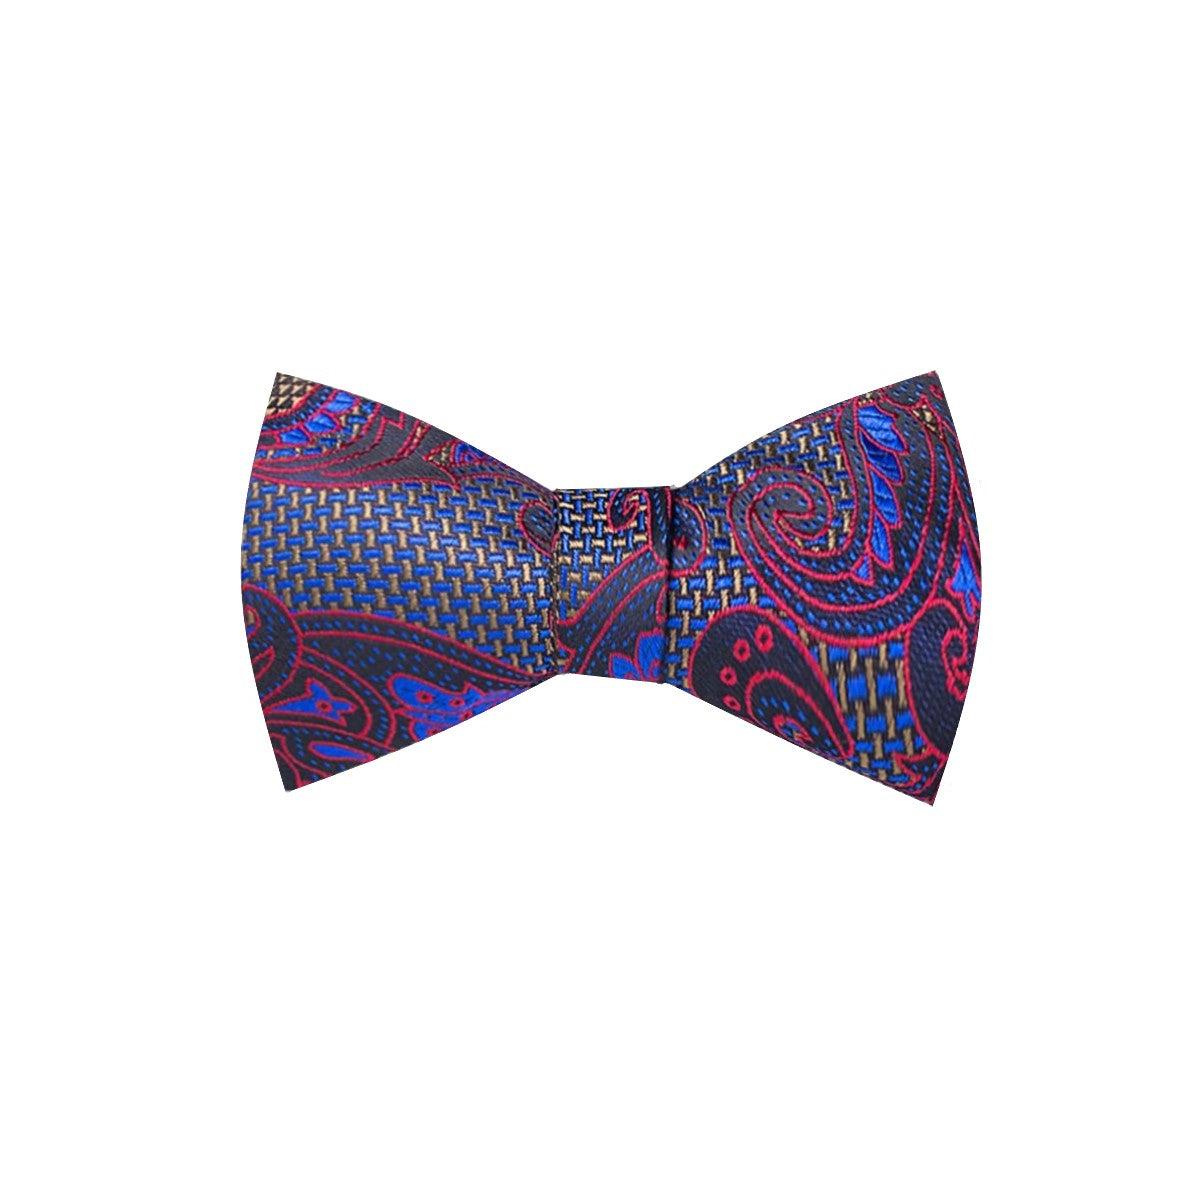 A Red, Blue, Grey Paisley Pattern Silk Self Tie Bow Tie